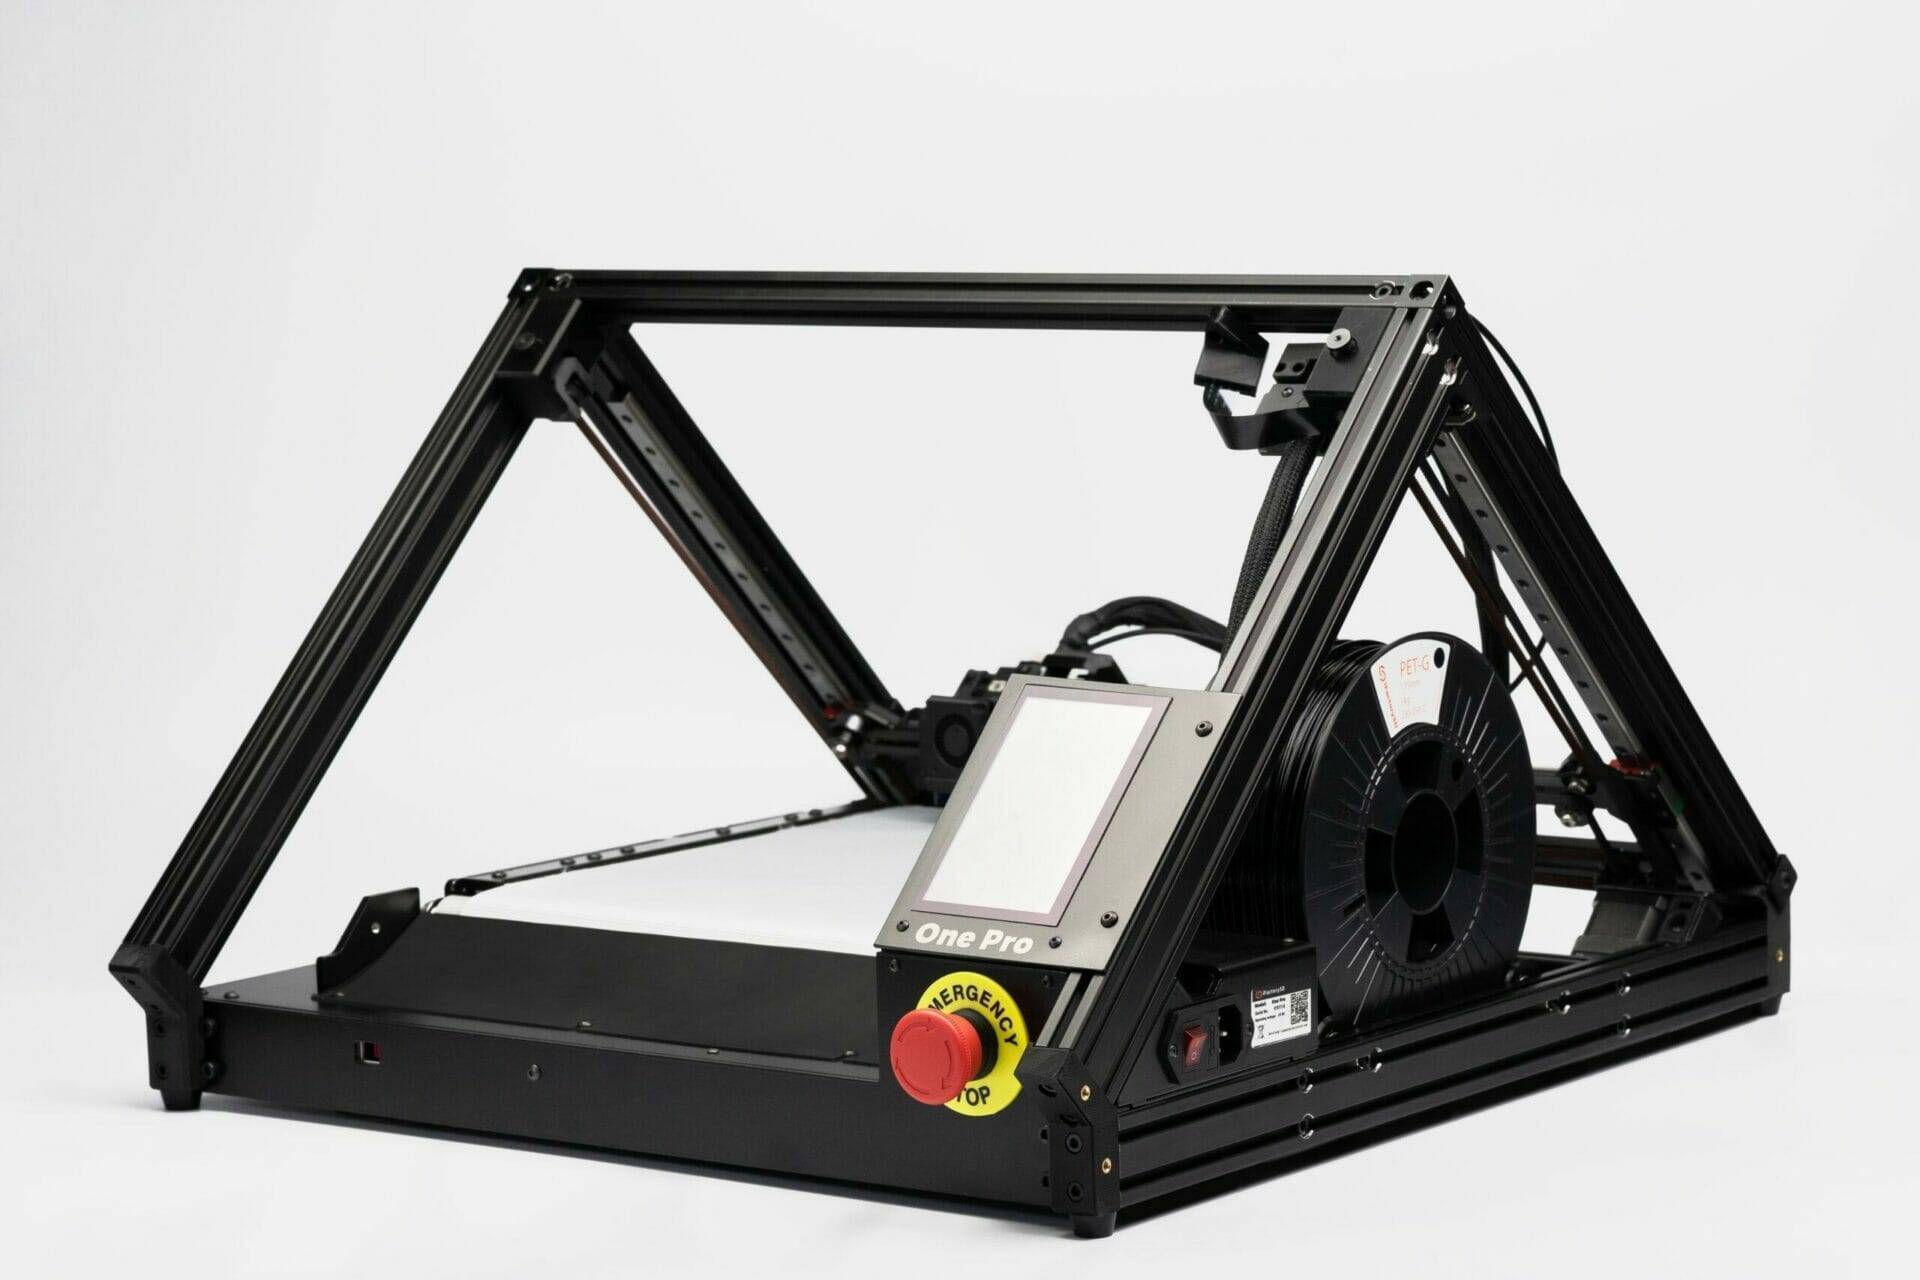 ONE PRO conveyor belt 3D printer with pyramid-like structure, black frame and silver print bed; black filament spool in the build space, which is located directly behind the screen and the emergency stop button